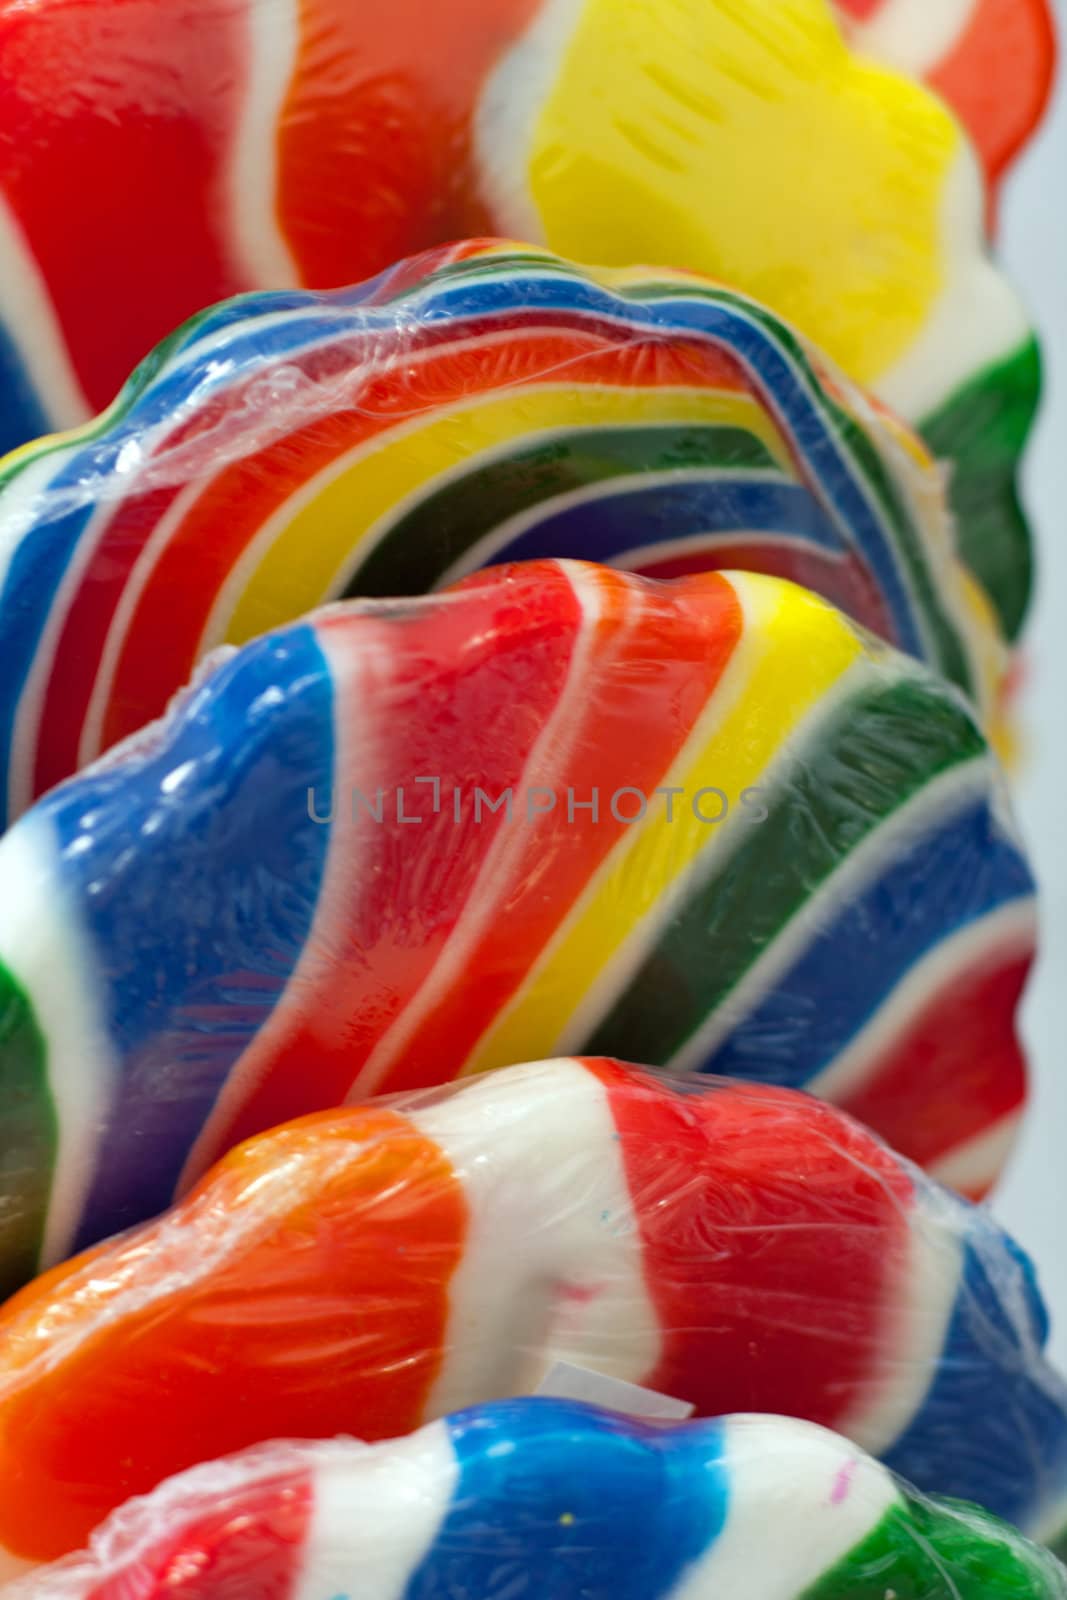 Candy in vivid bright colors on a stick